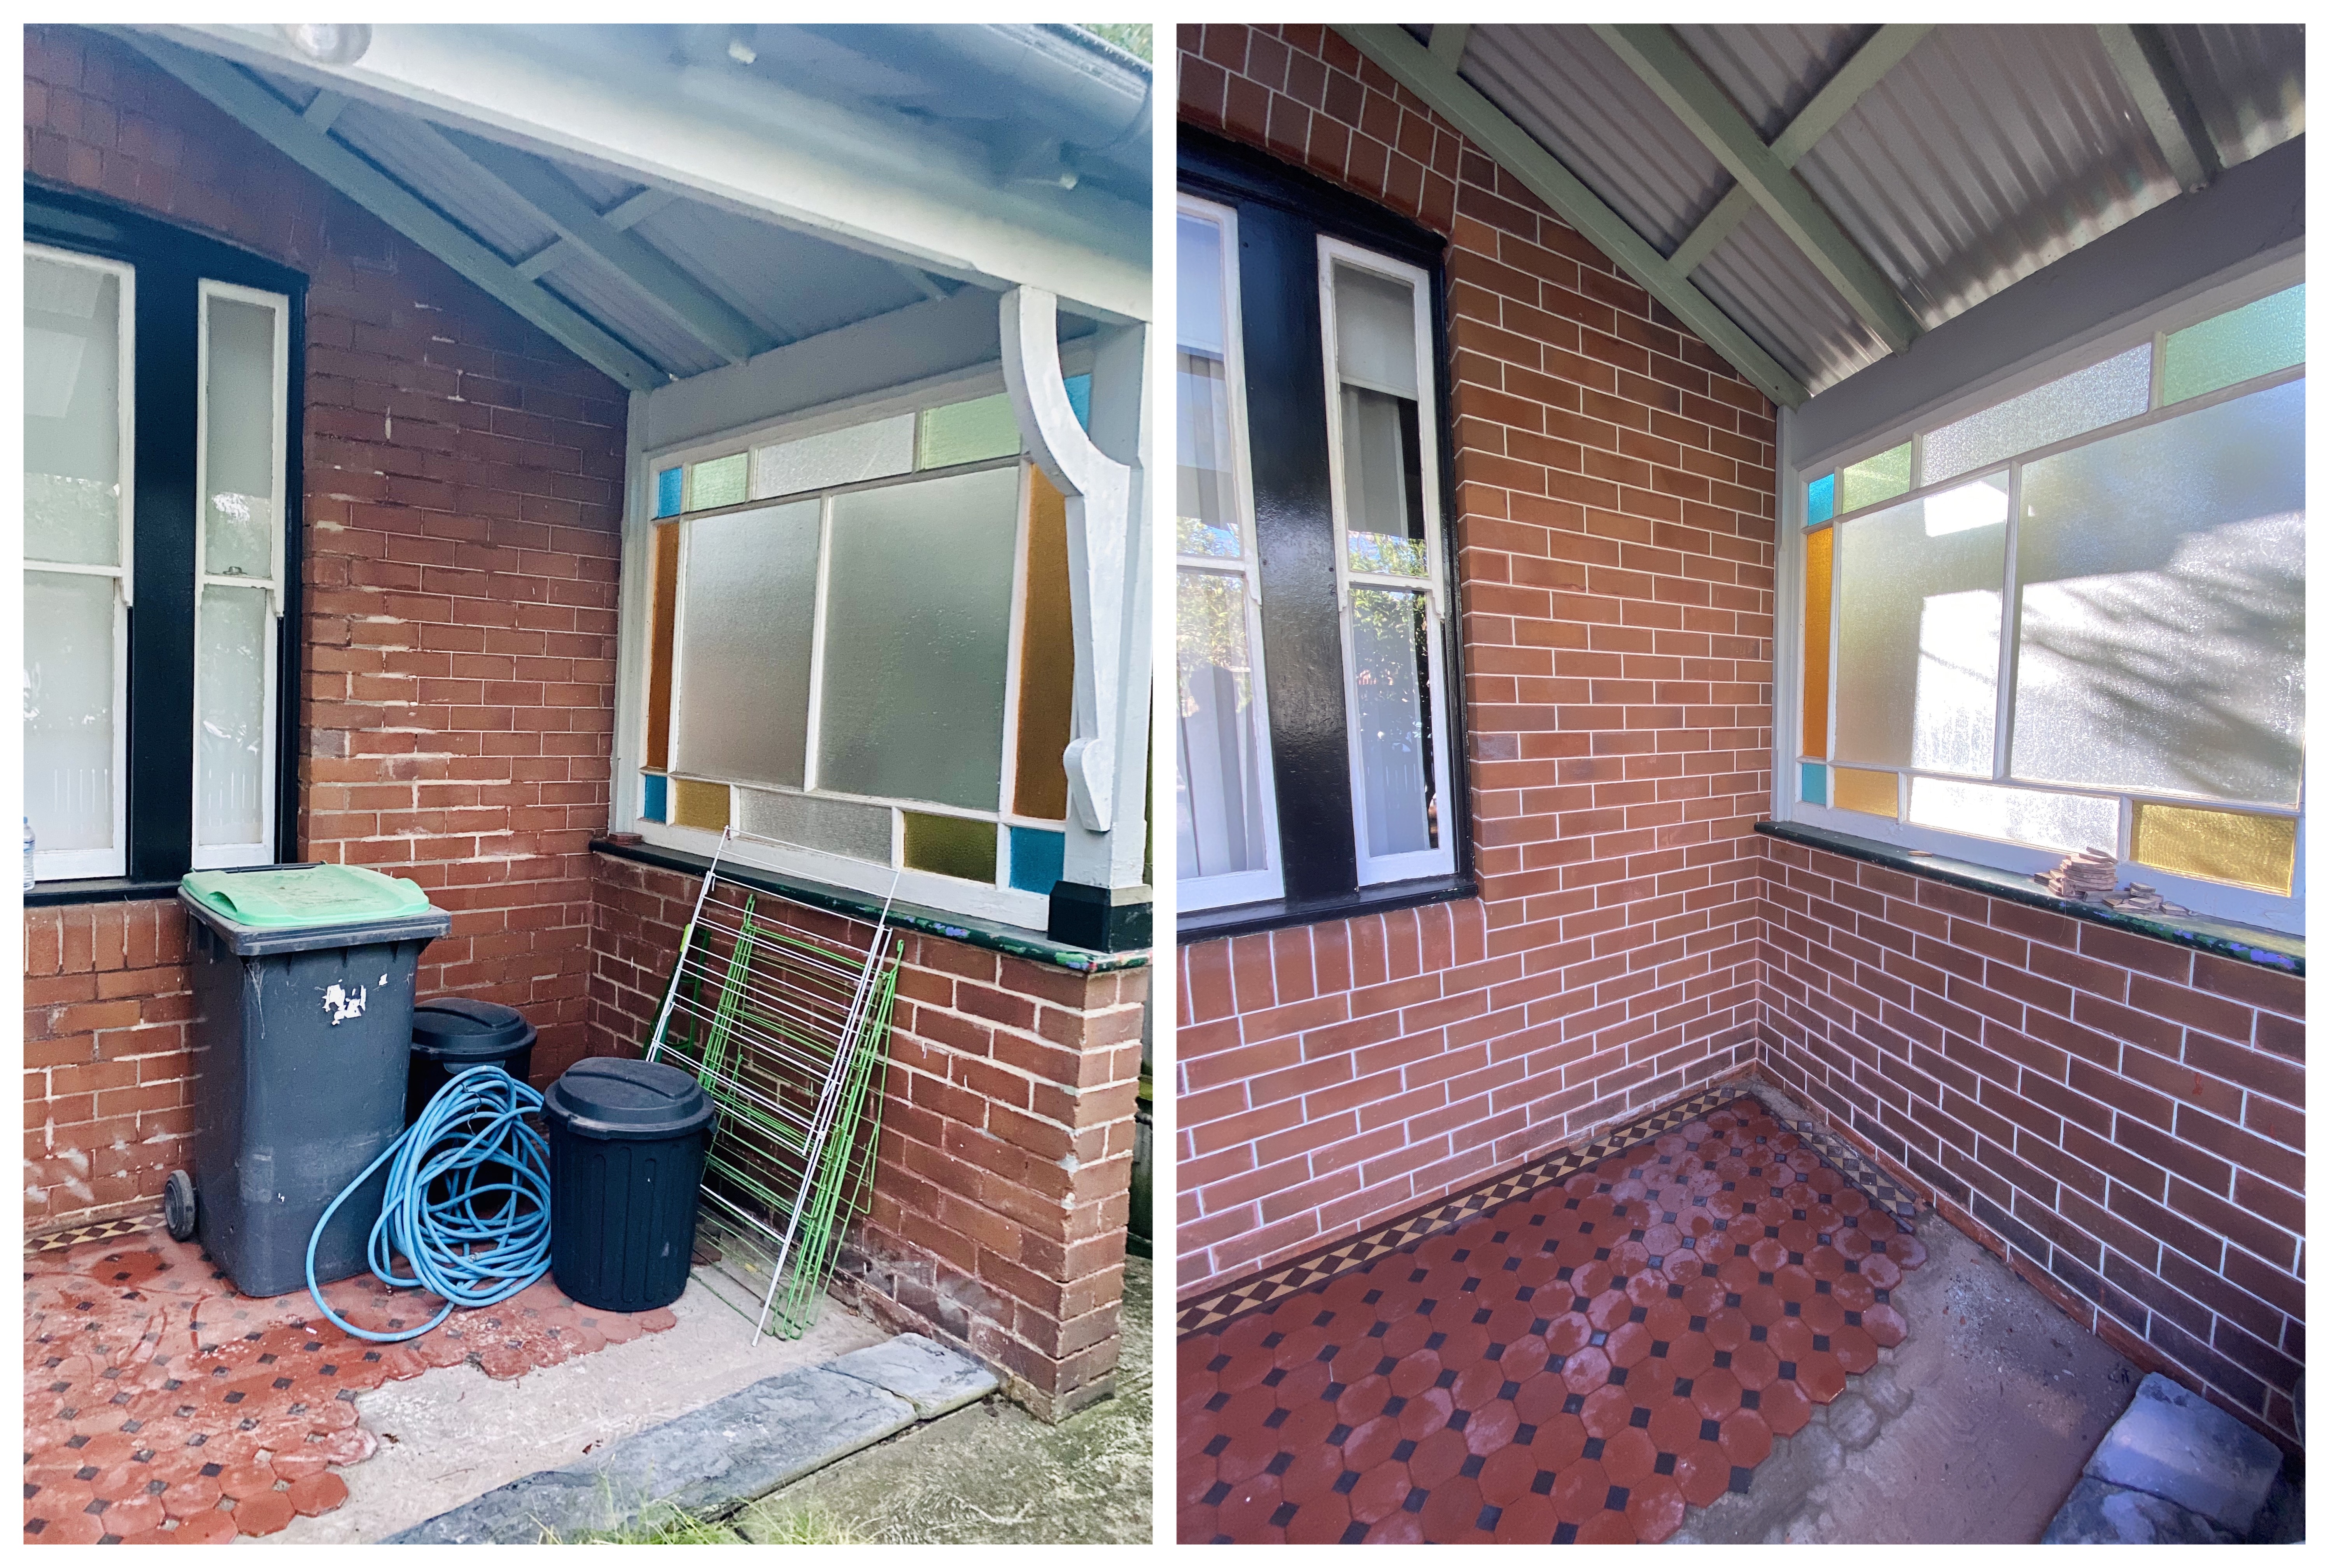 Tuckpointing "Before and After" Dawson St Cooks Hill, Newcastle NSW Australia